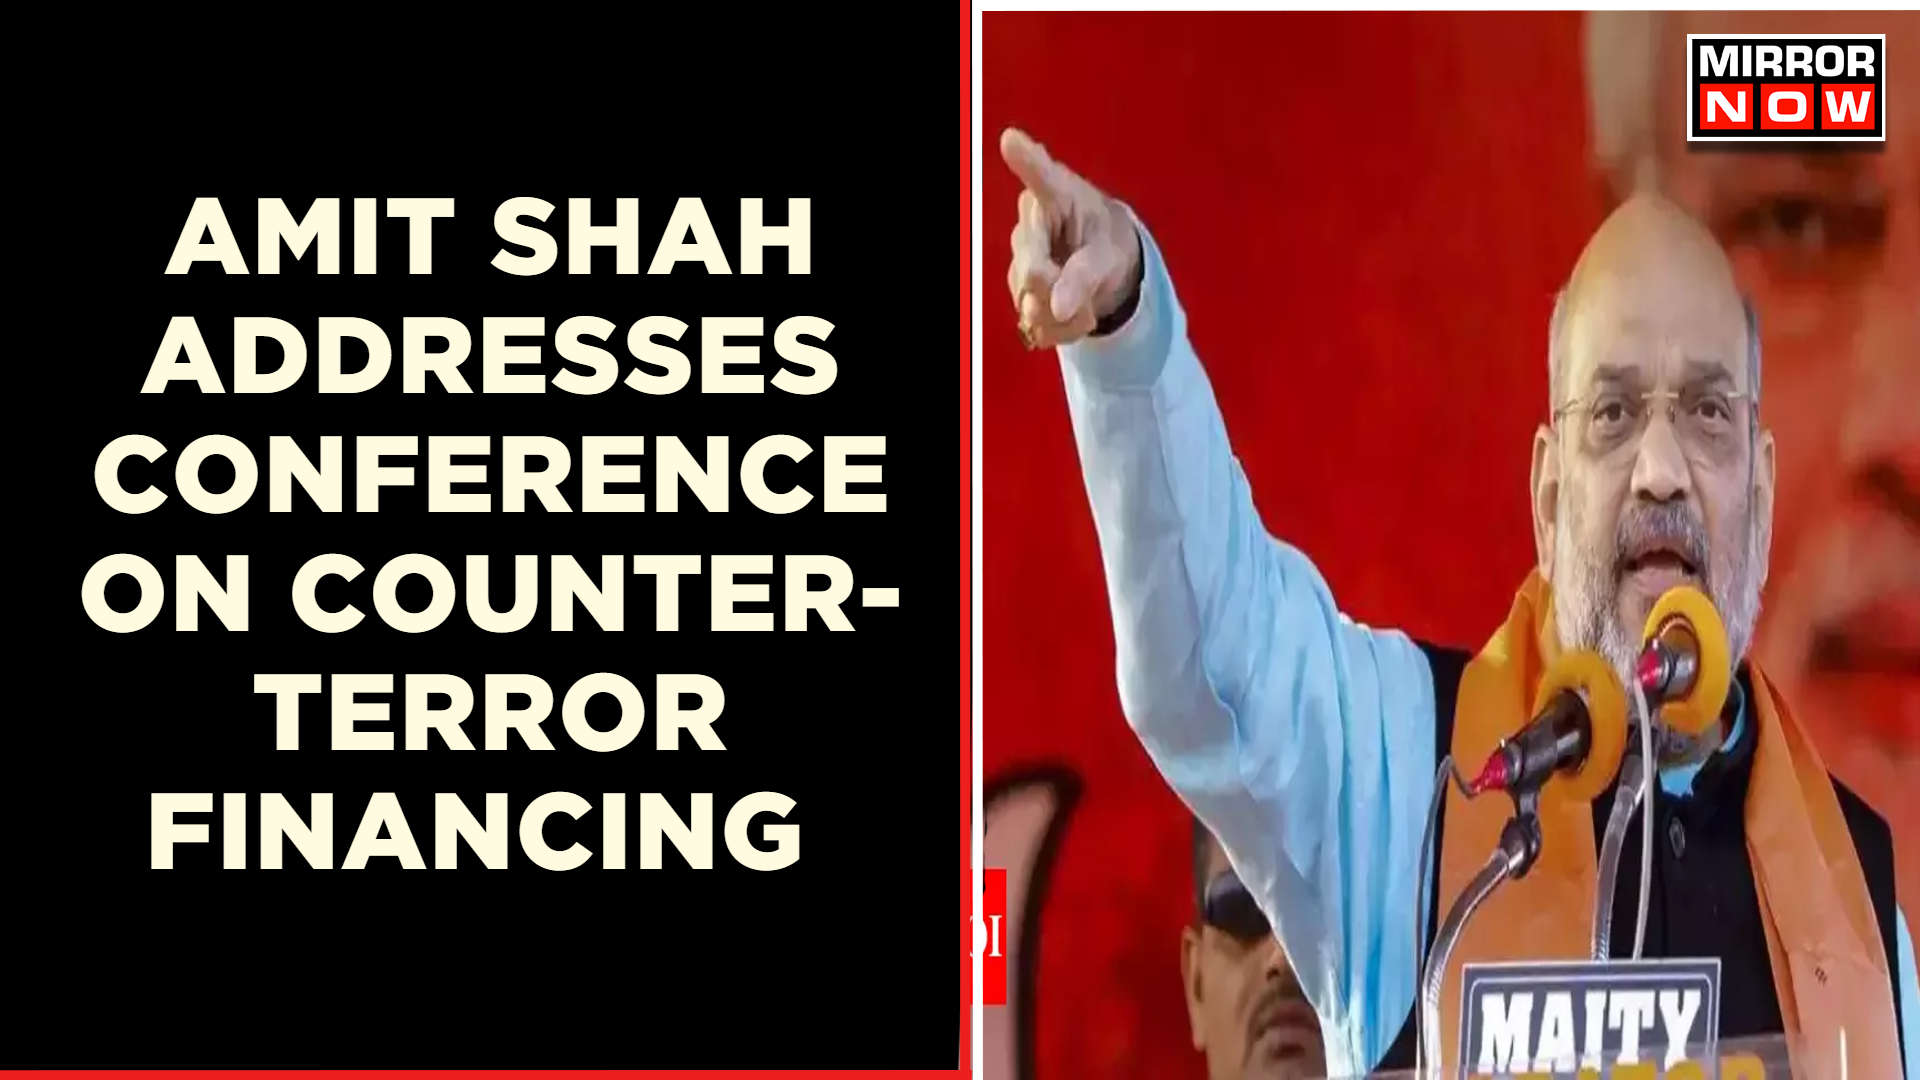 Home Minister Amit Shah Addresses Conference On Counter- Terror Financing  English News